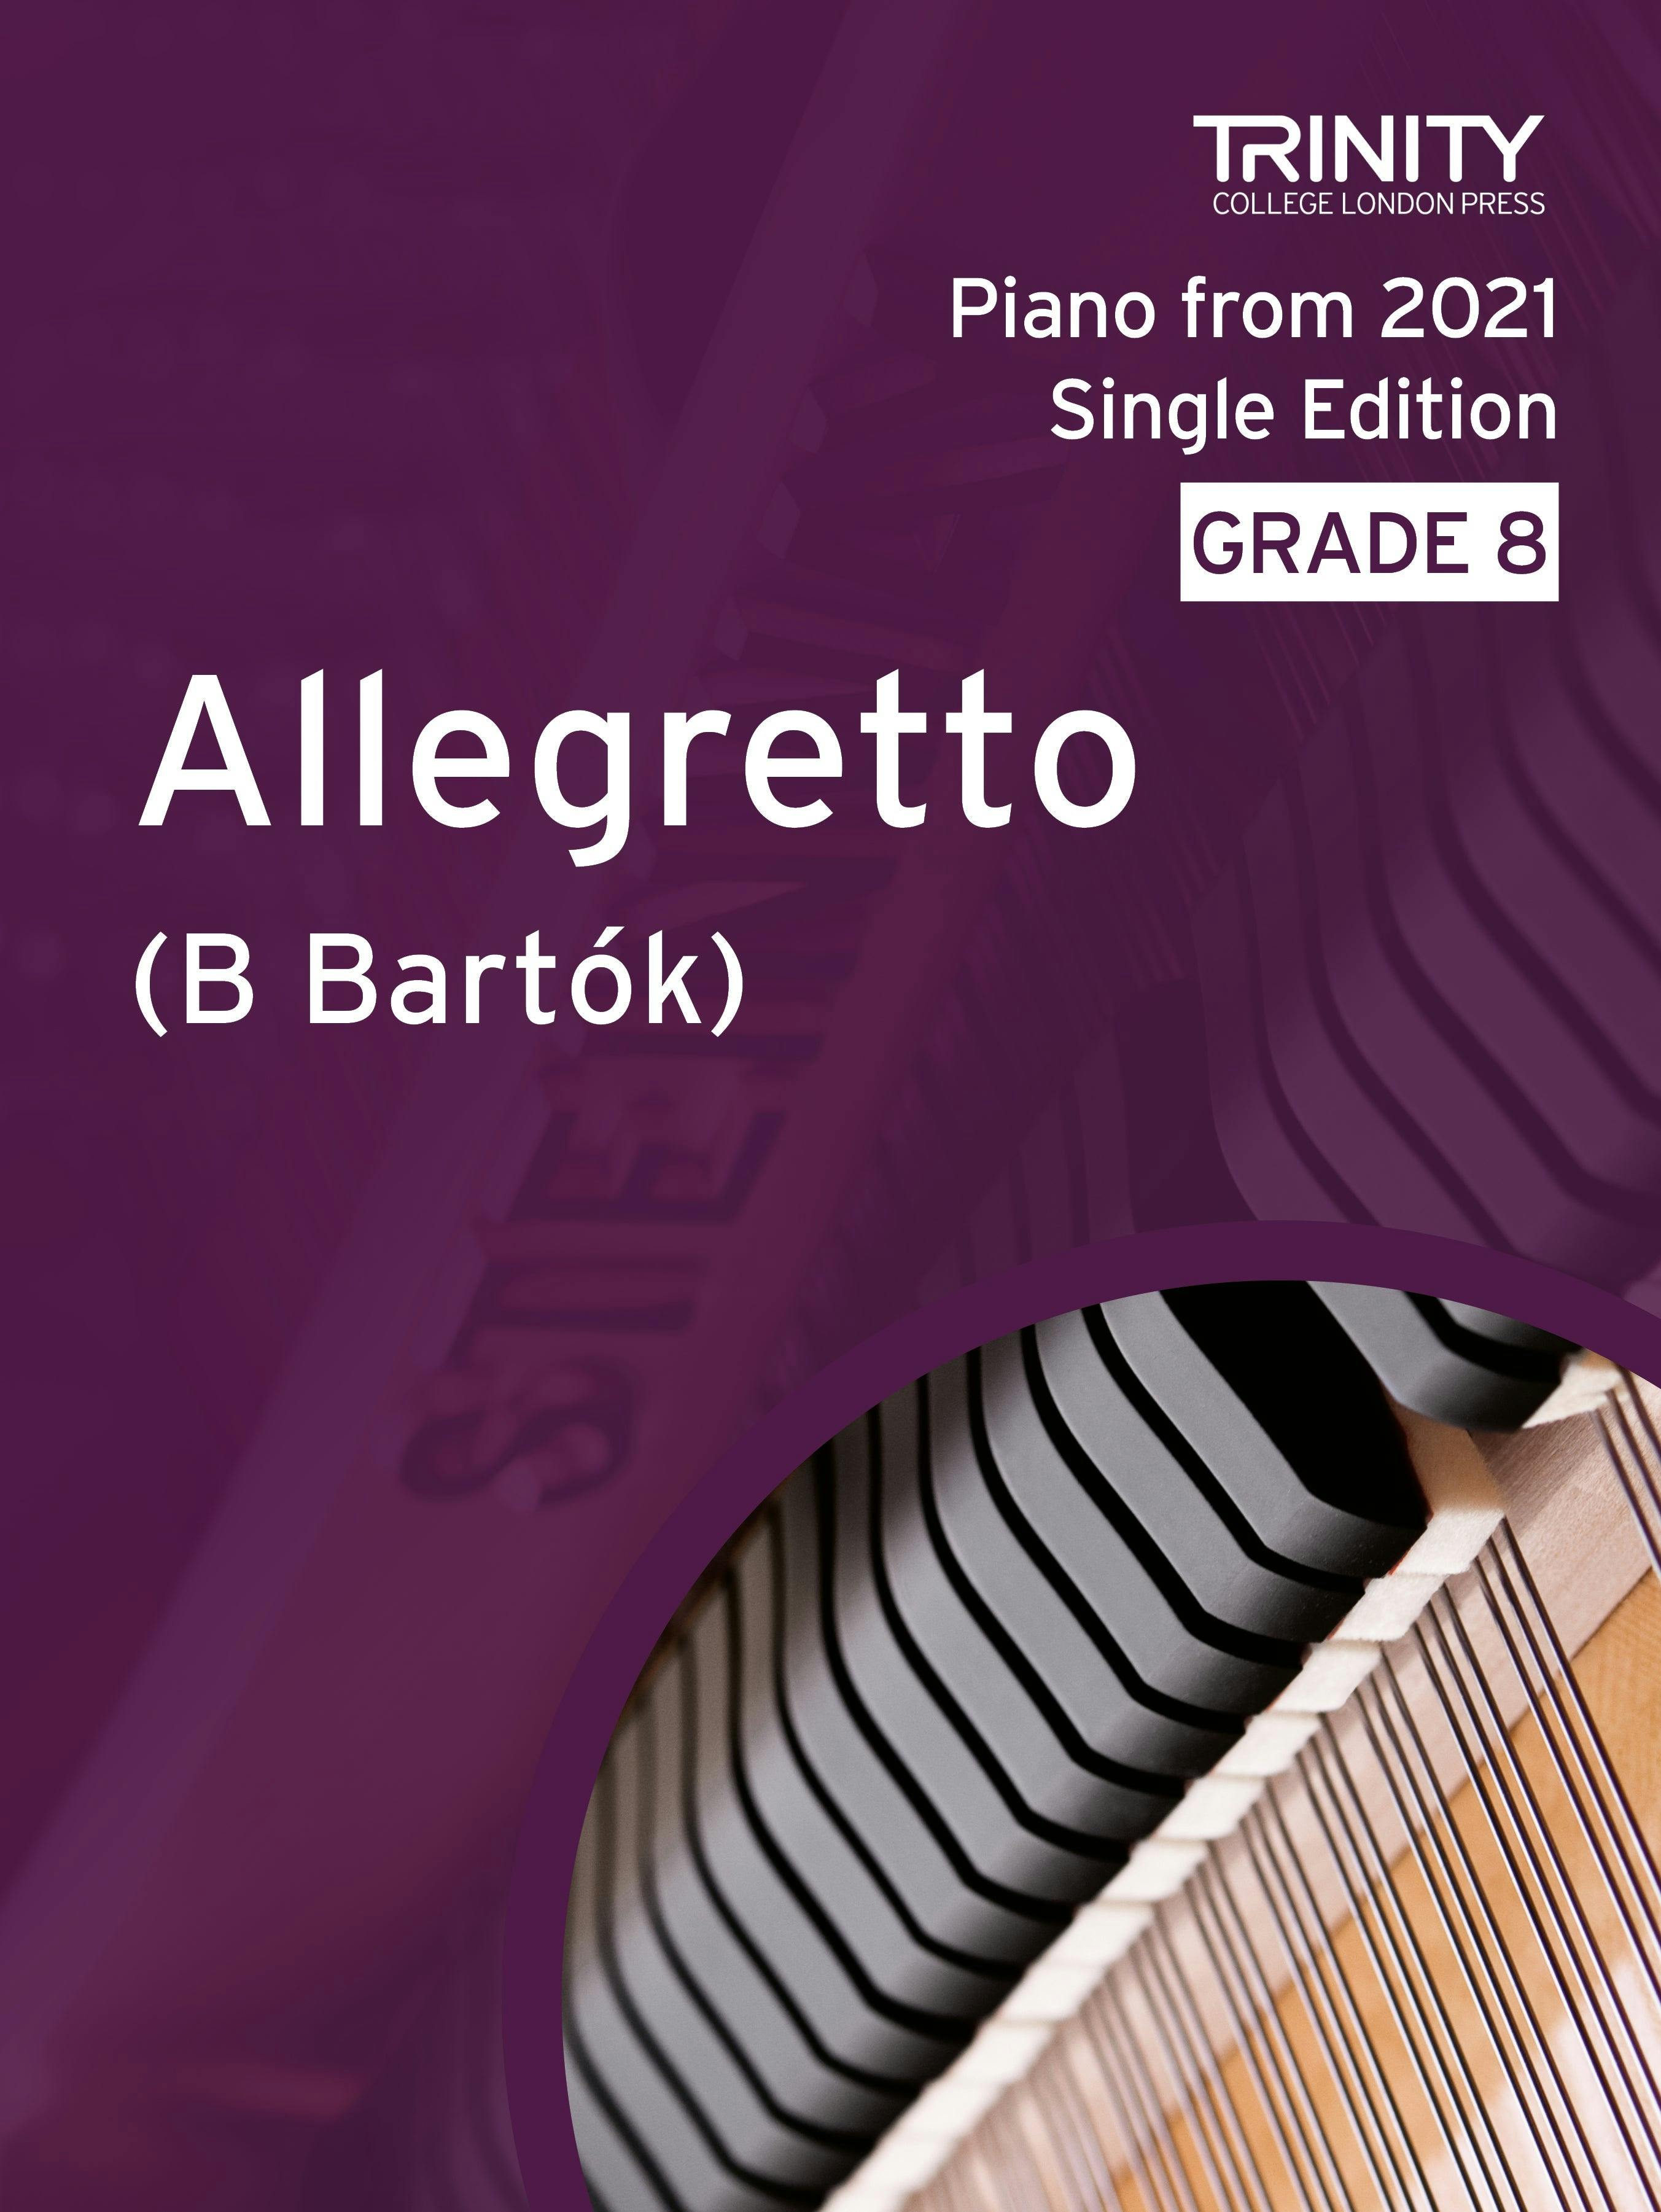 Allegretto (1st movt from Suite, op. 14) - Bartók  (Grade 8 Piano) - ebook